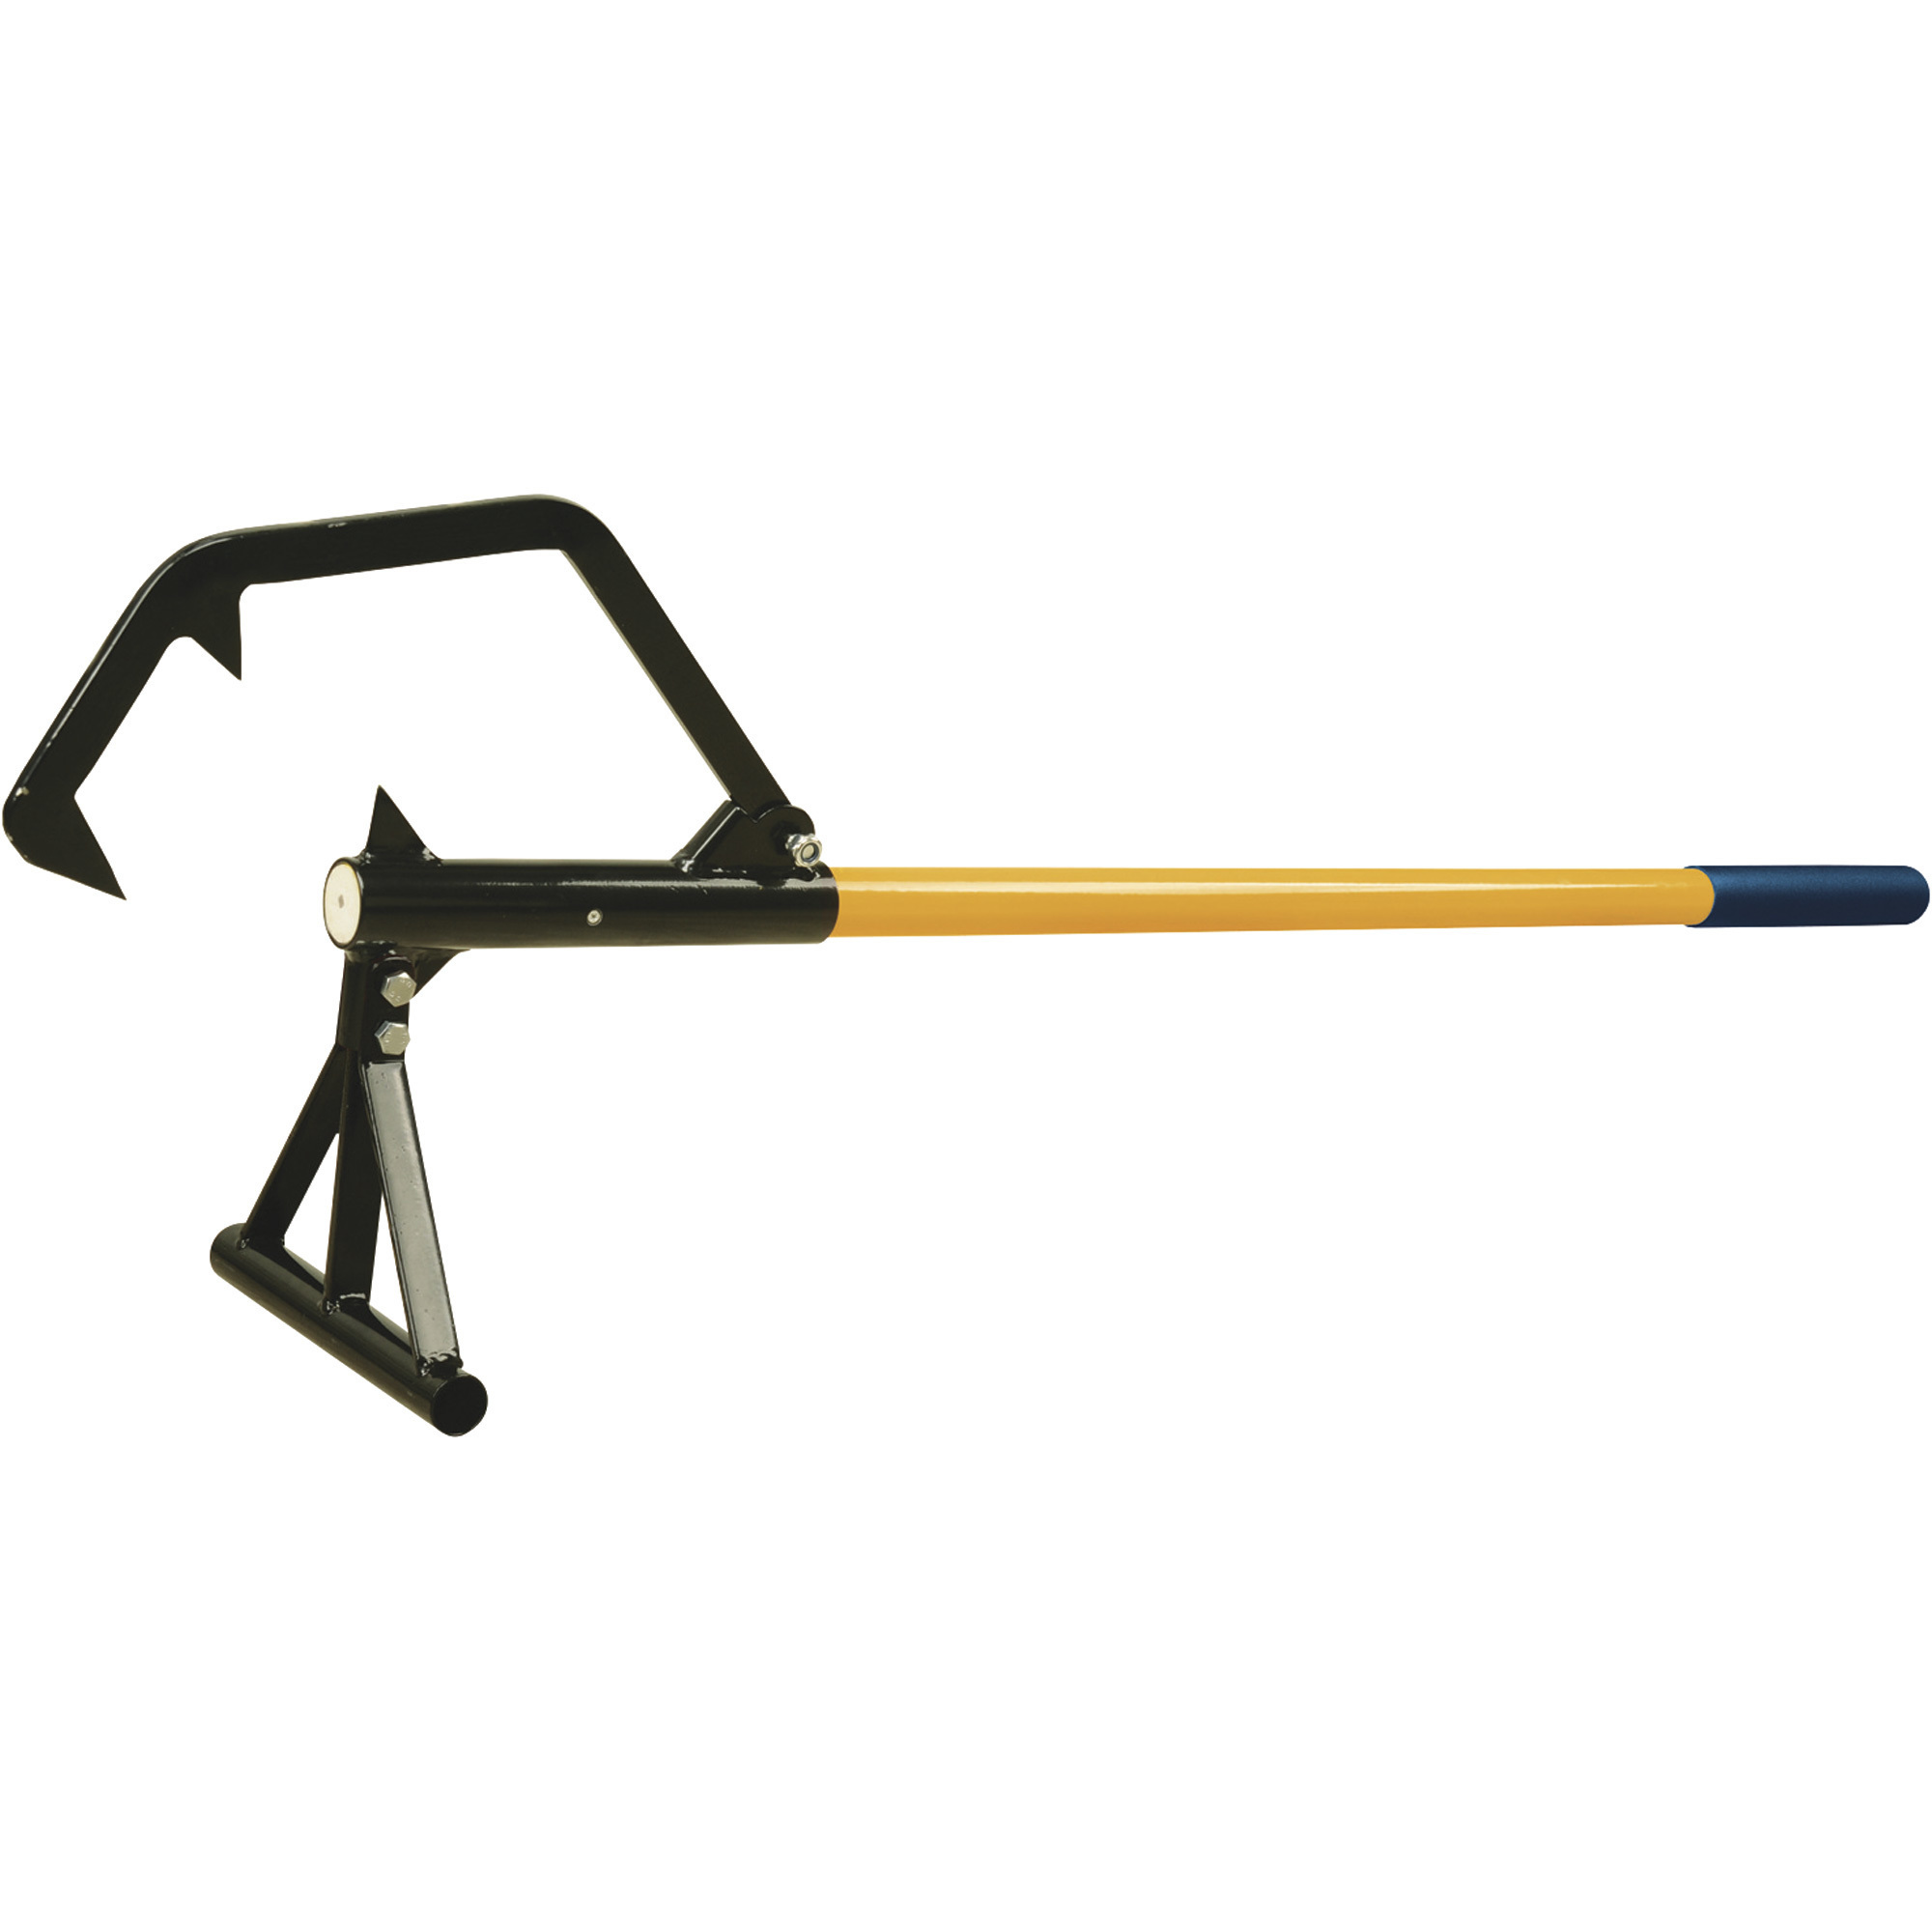 Roughneck Double Hook Steel Core A-Frame Timberjack, 48Inch L